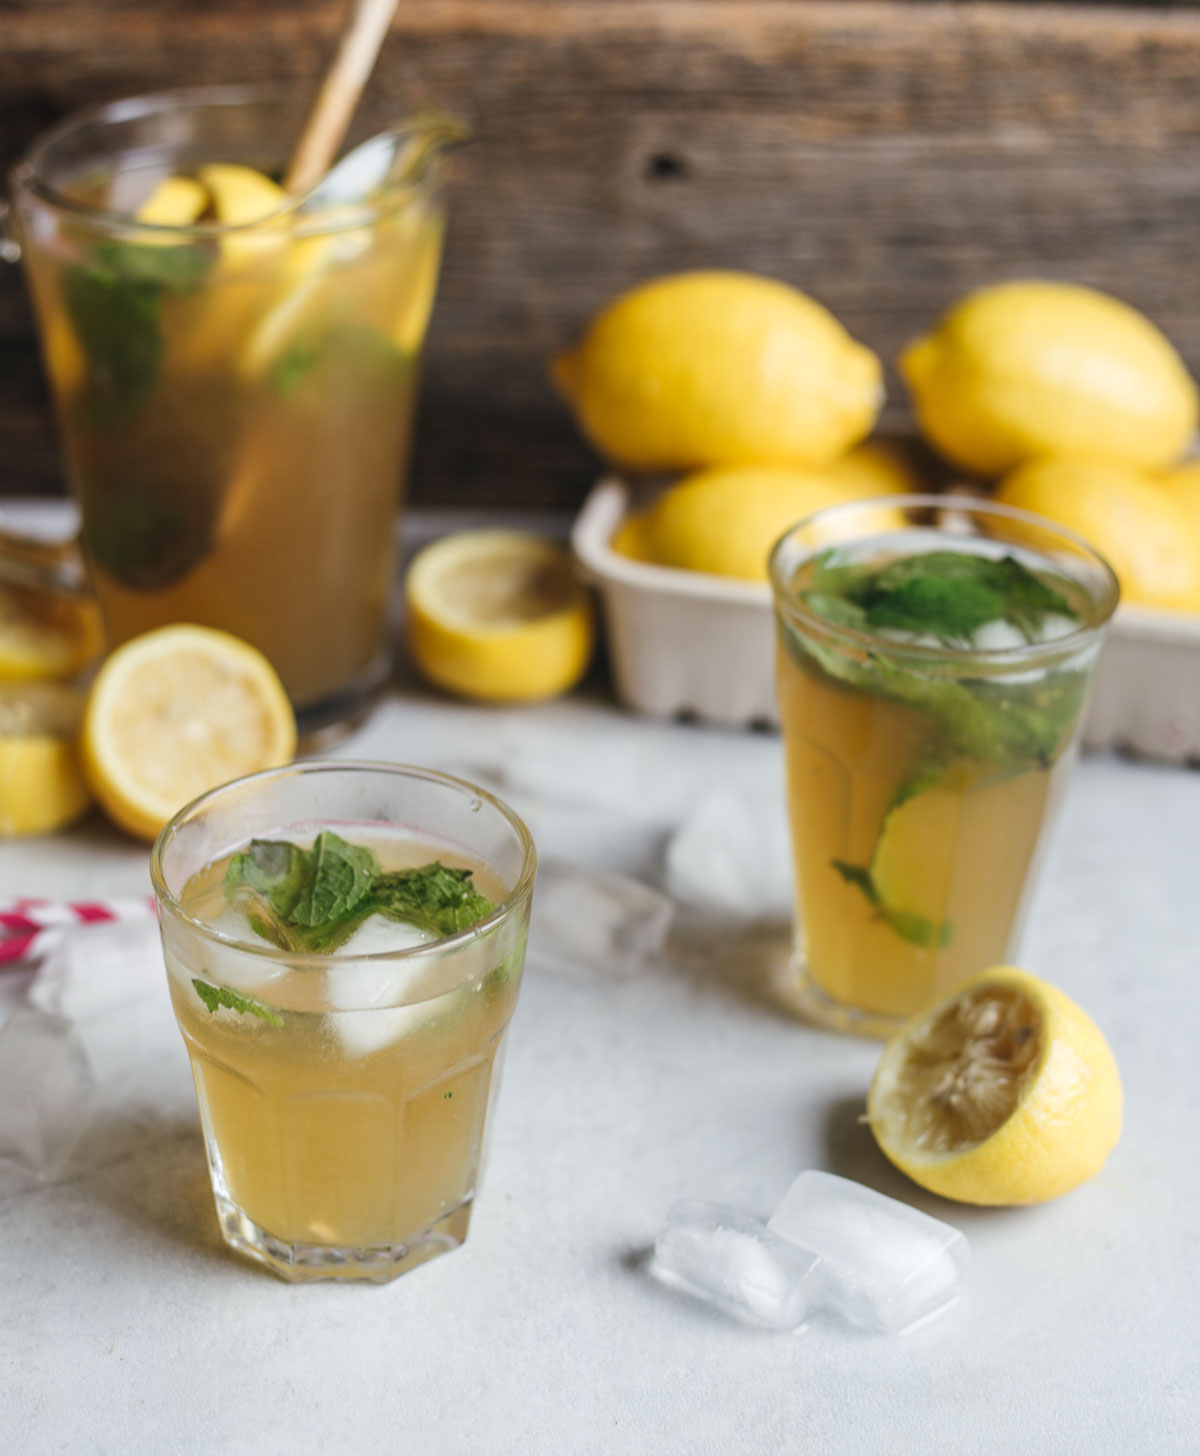 Two glasses of lemonade garnished with mint on a surface